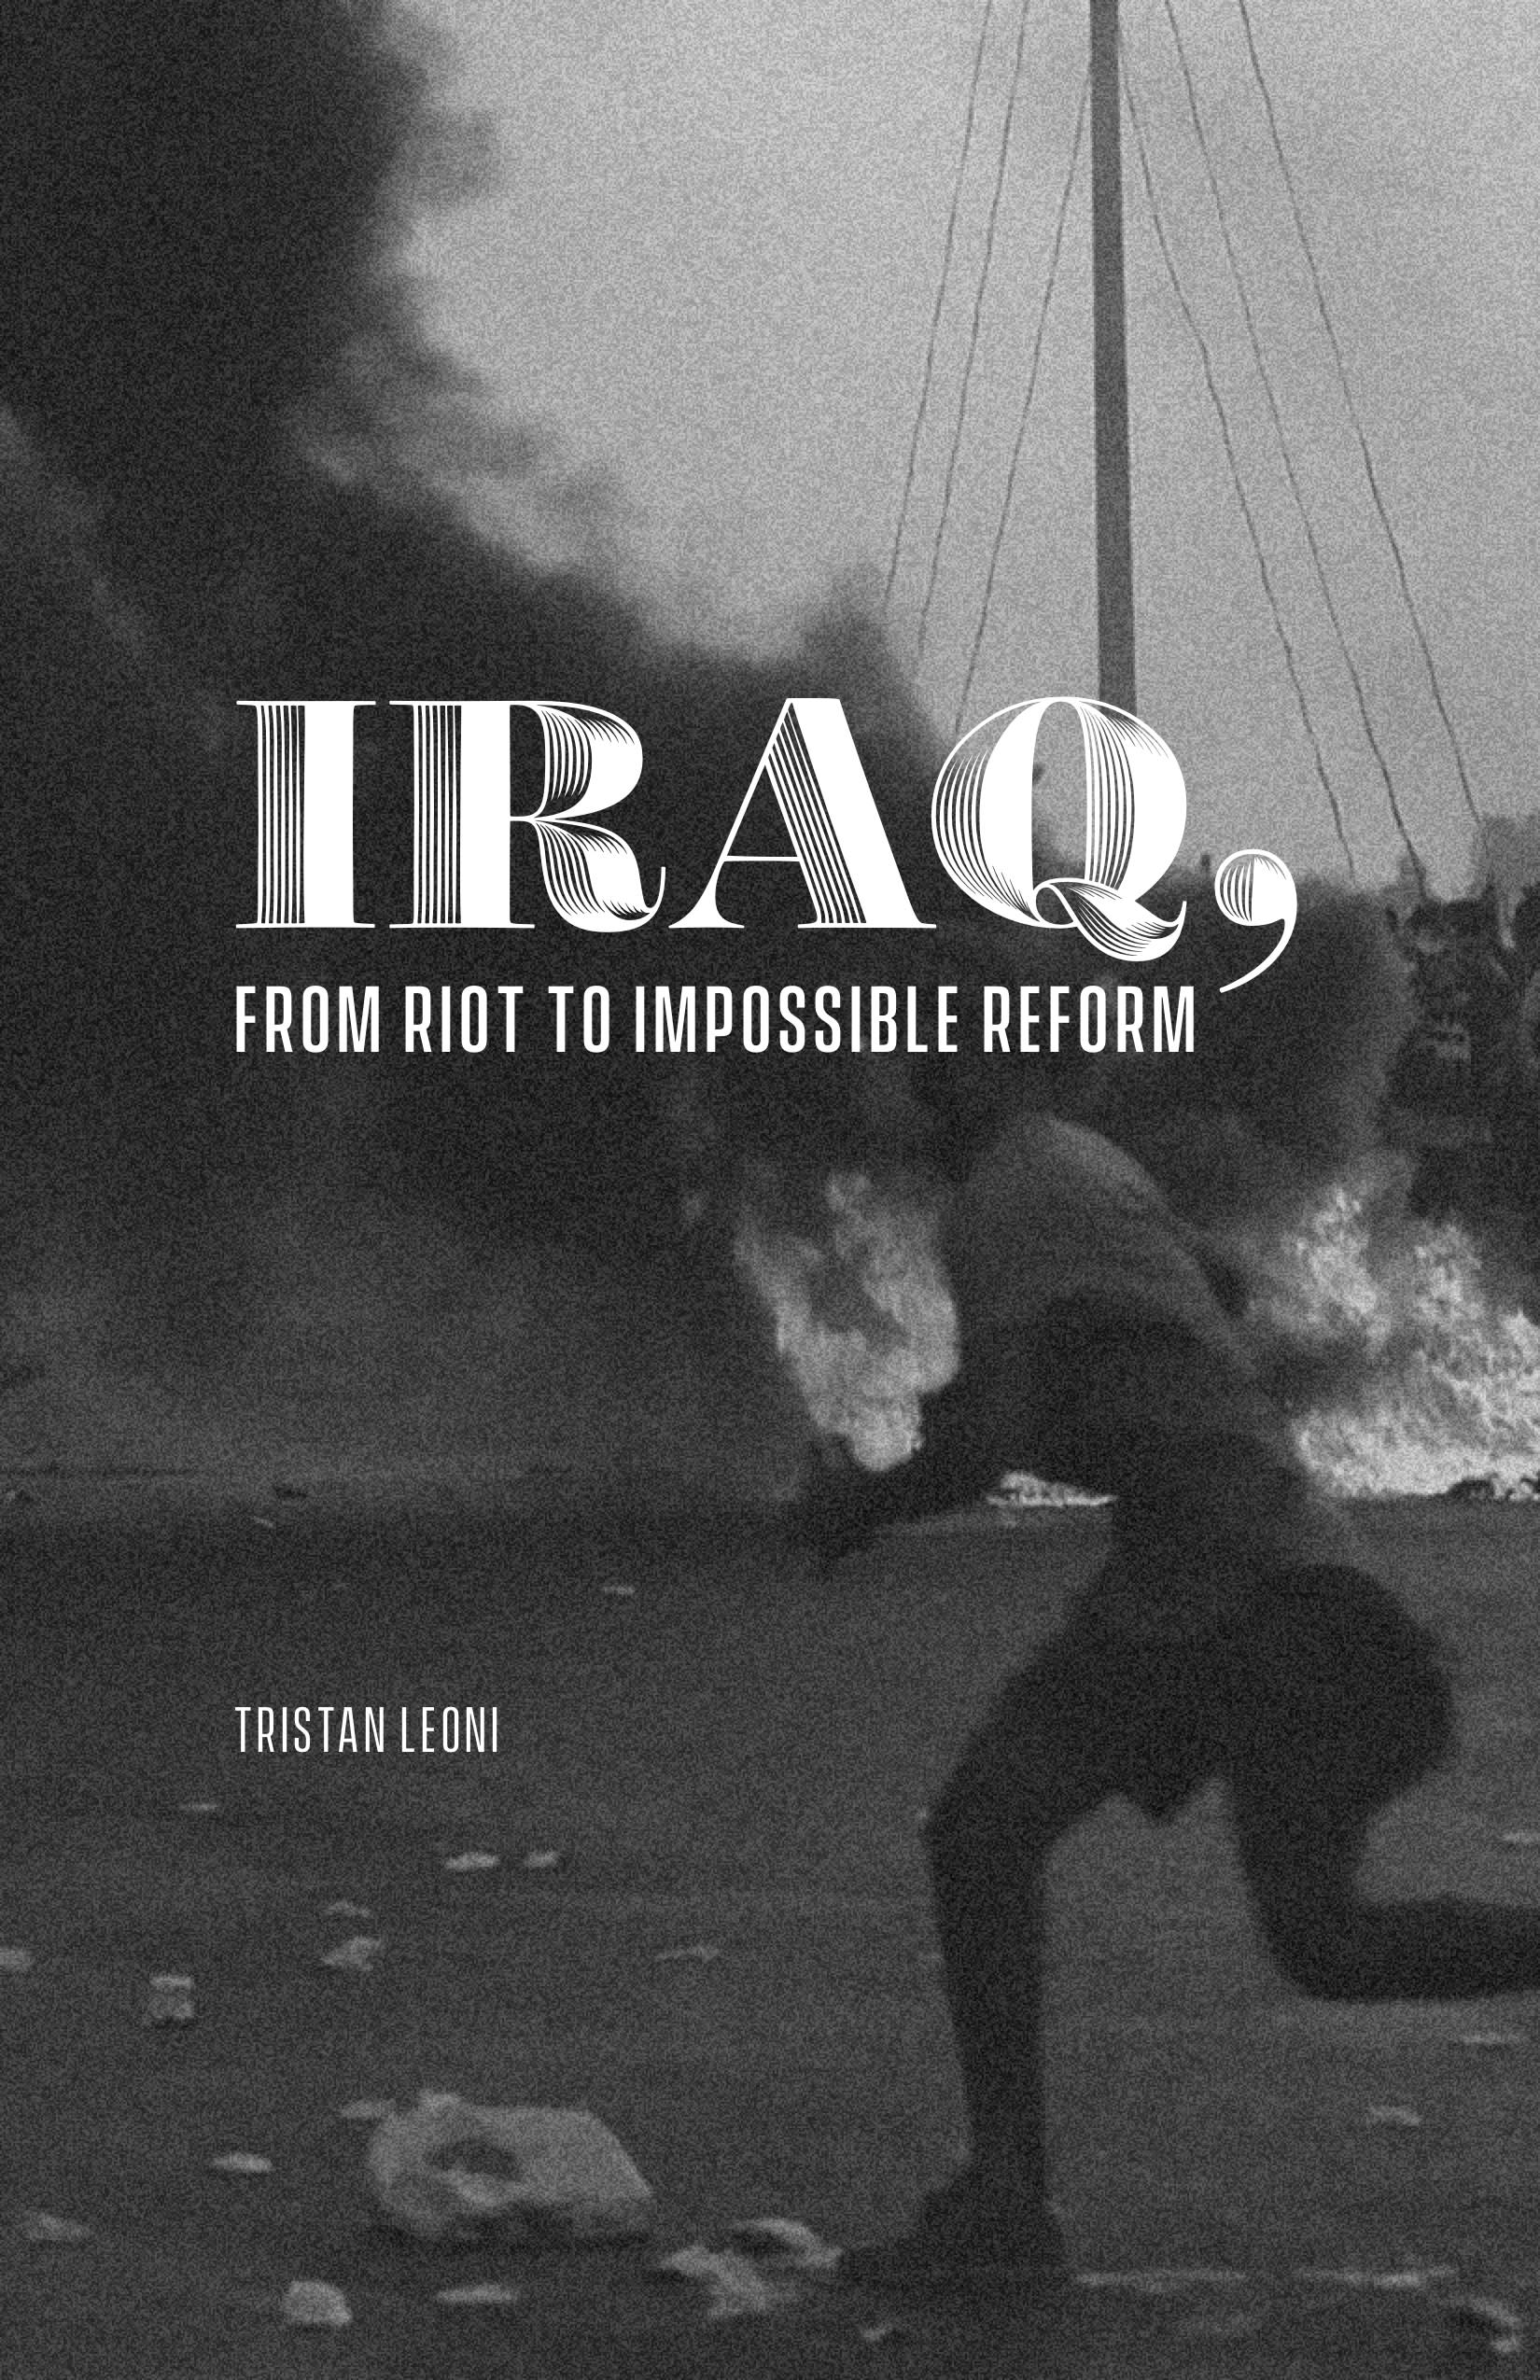 Cover Image for Iraq: From Riot to Impossible Reform